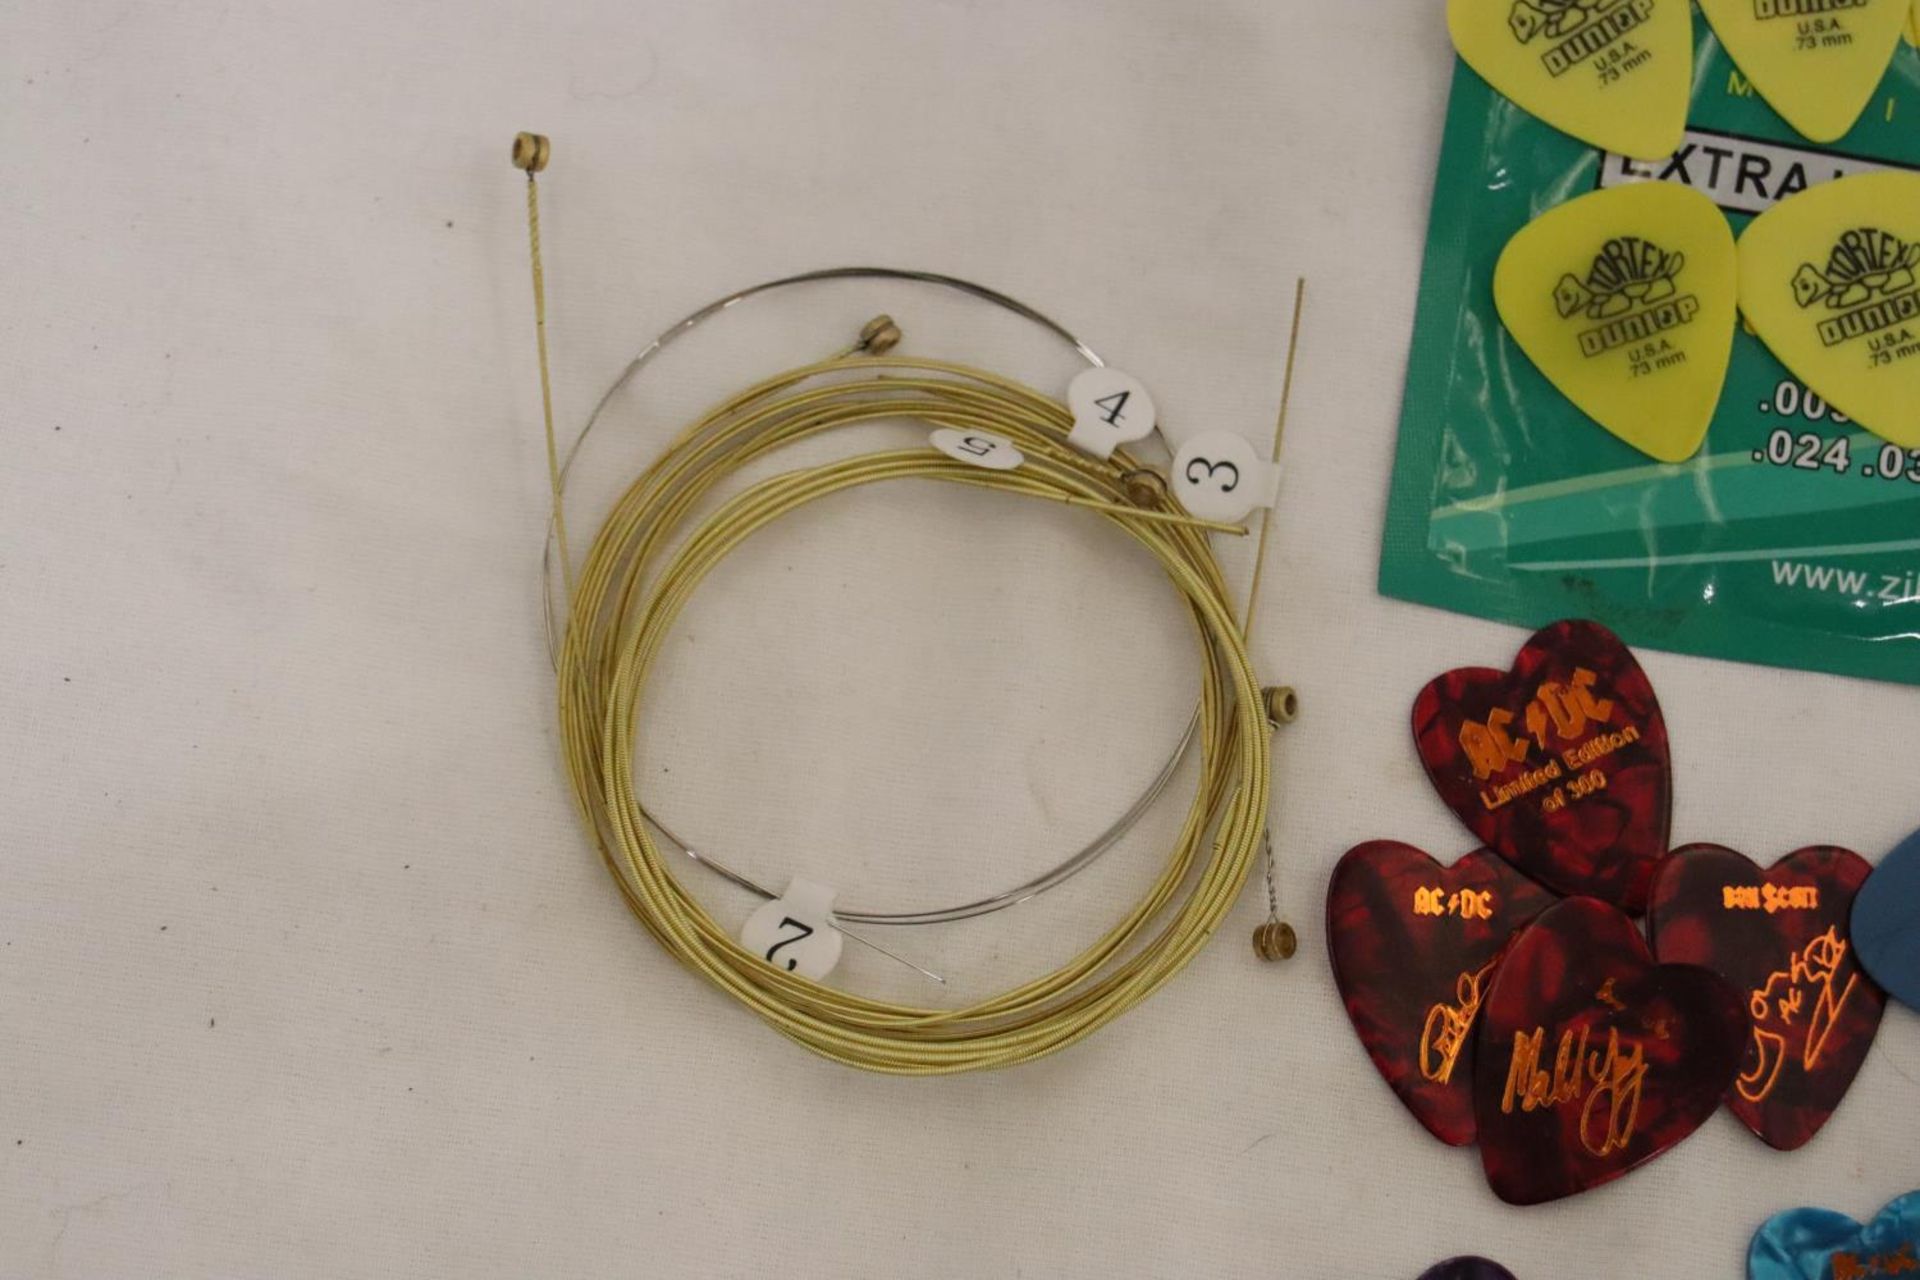 A QUANTITY OF ELECTRIC GUITAR STRINGS AND PLECTRUMS - Image 4 of 4